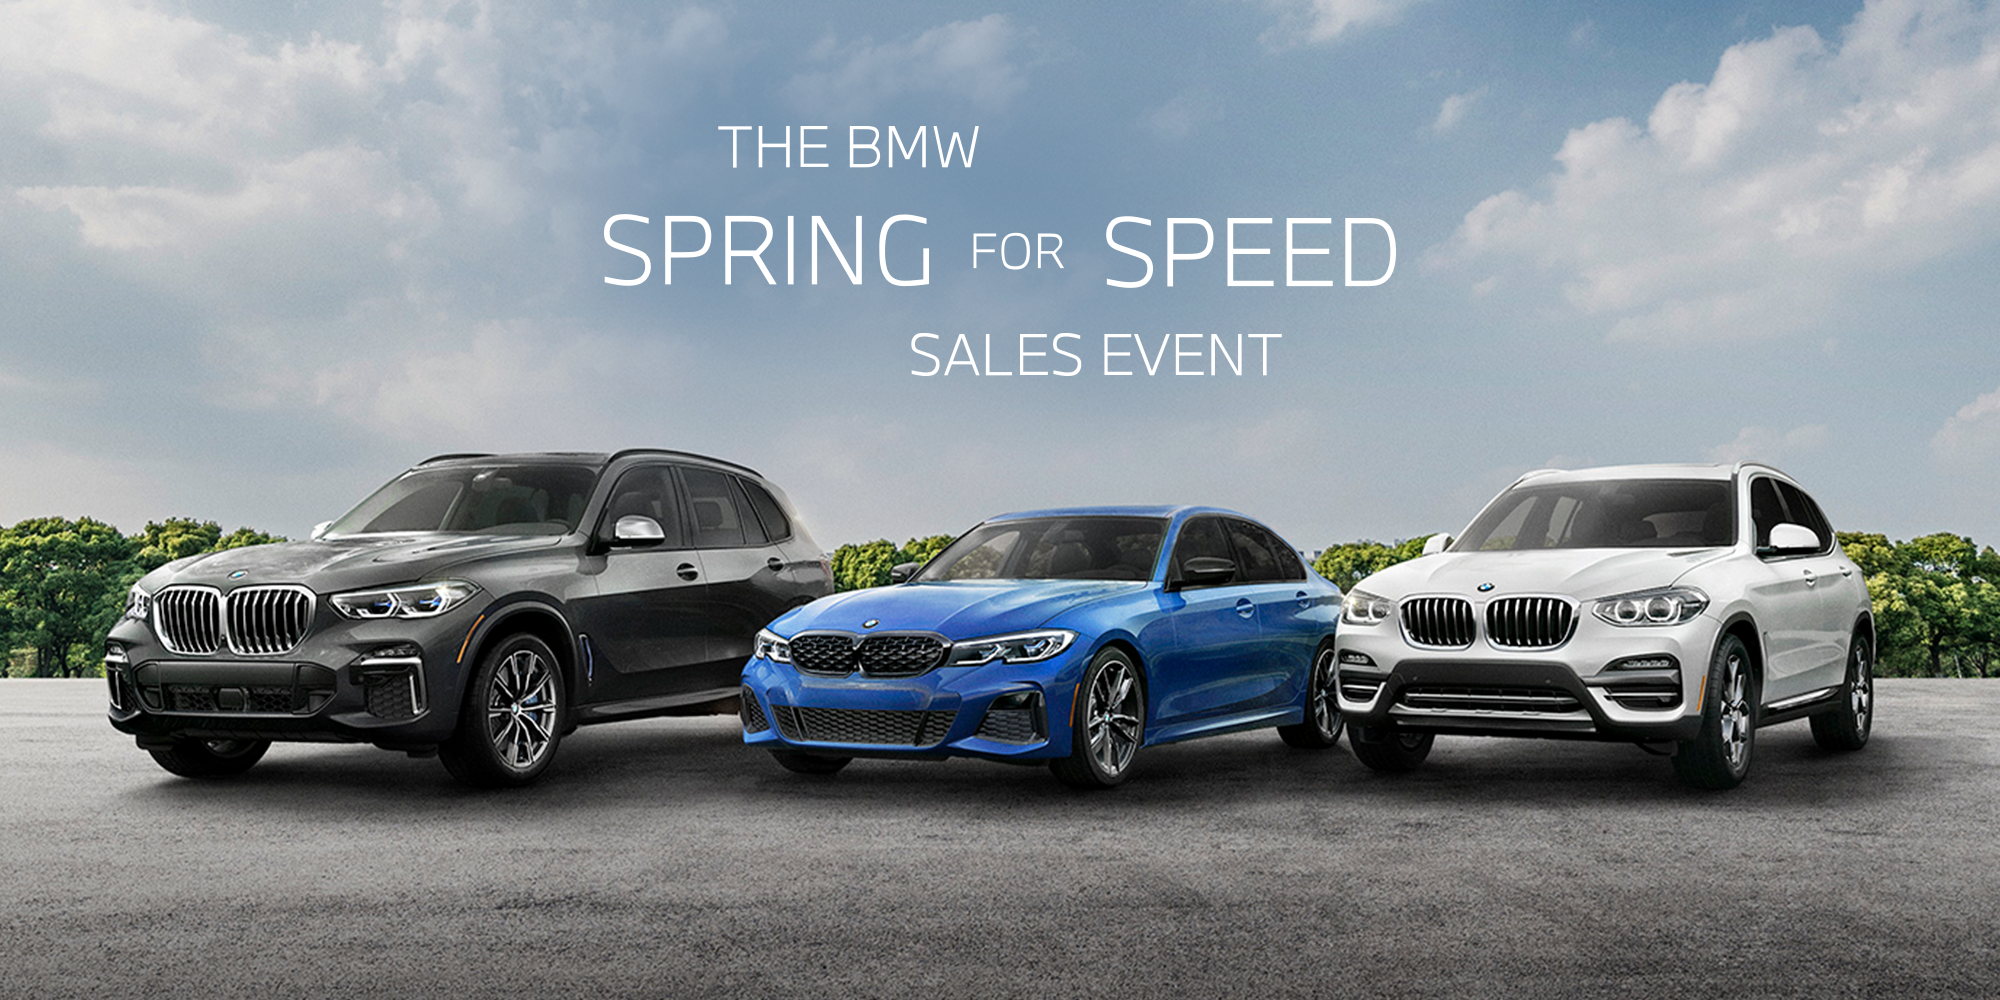 BMW Spring for Speed Sales Event